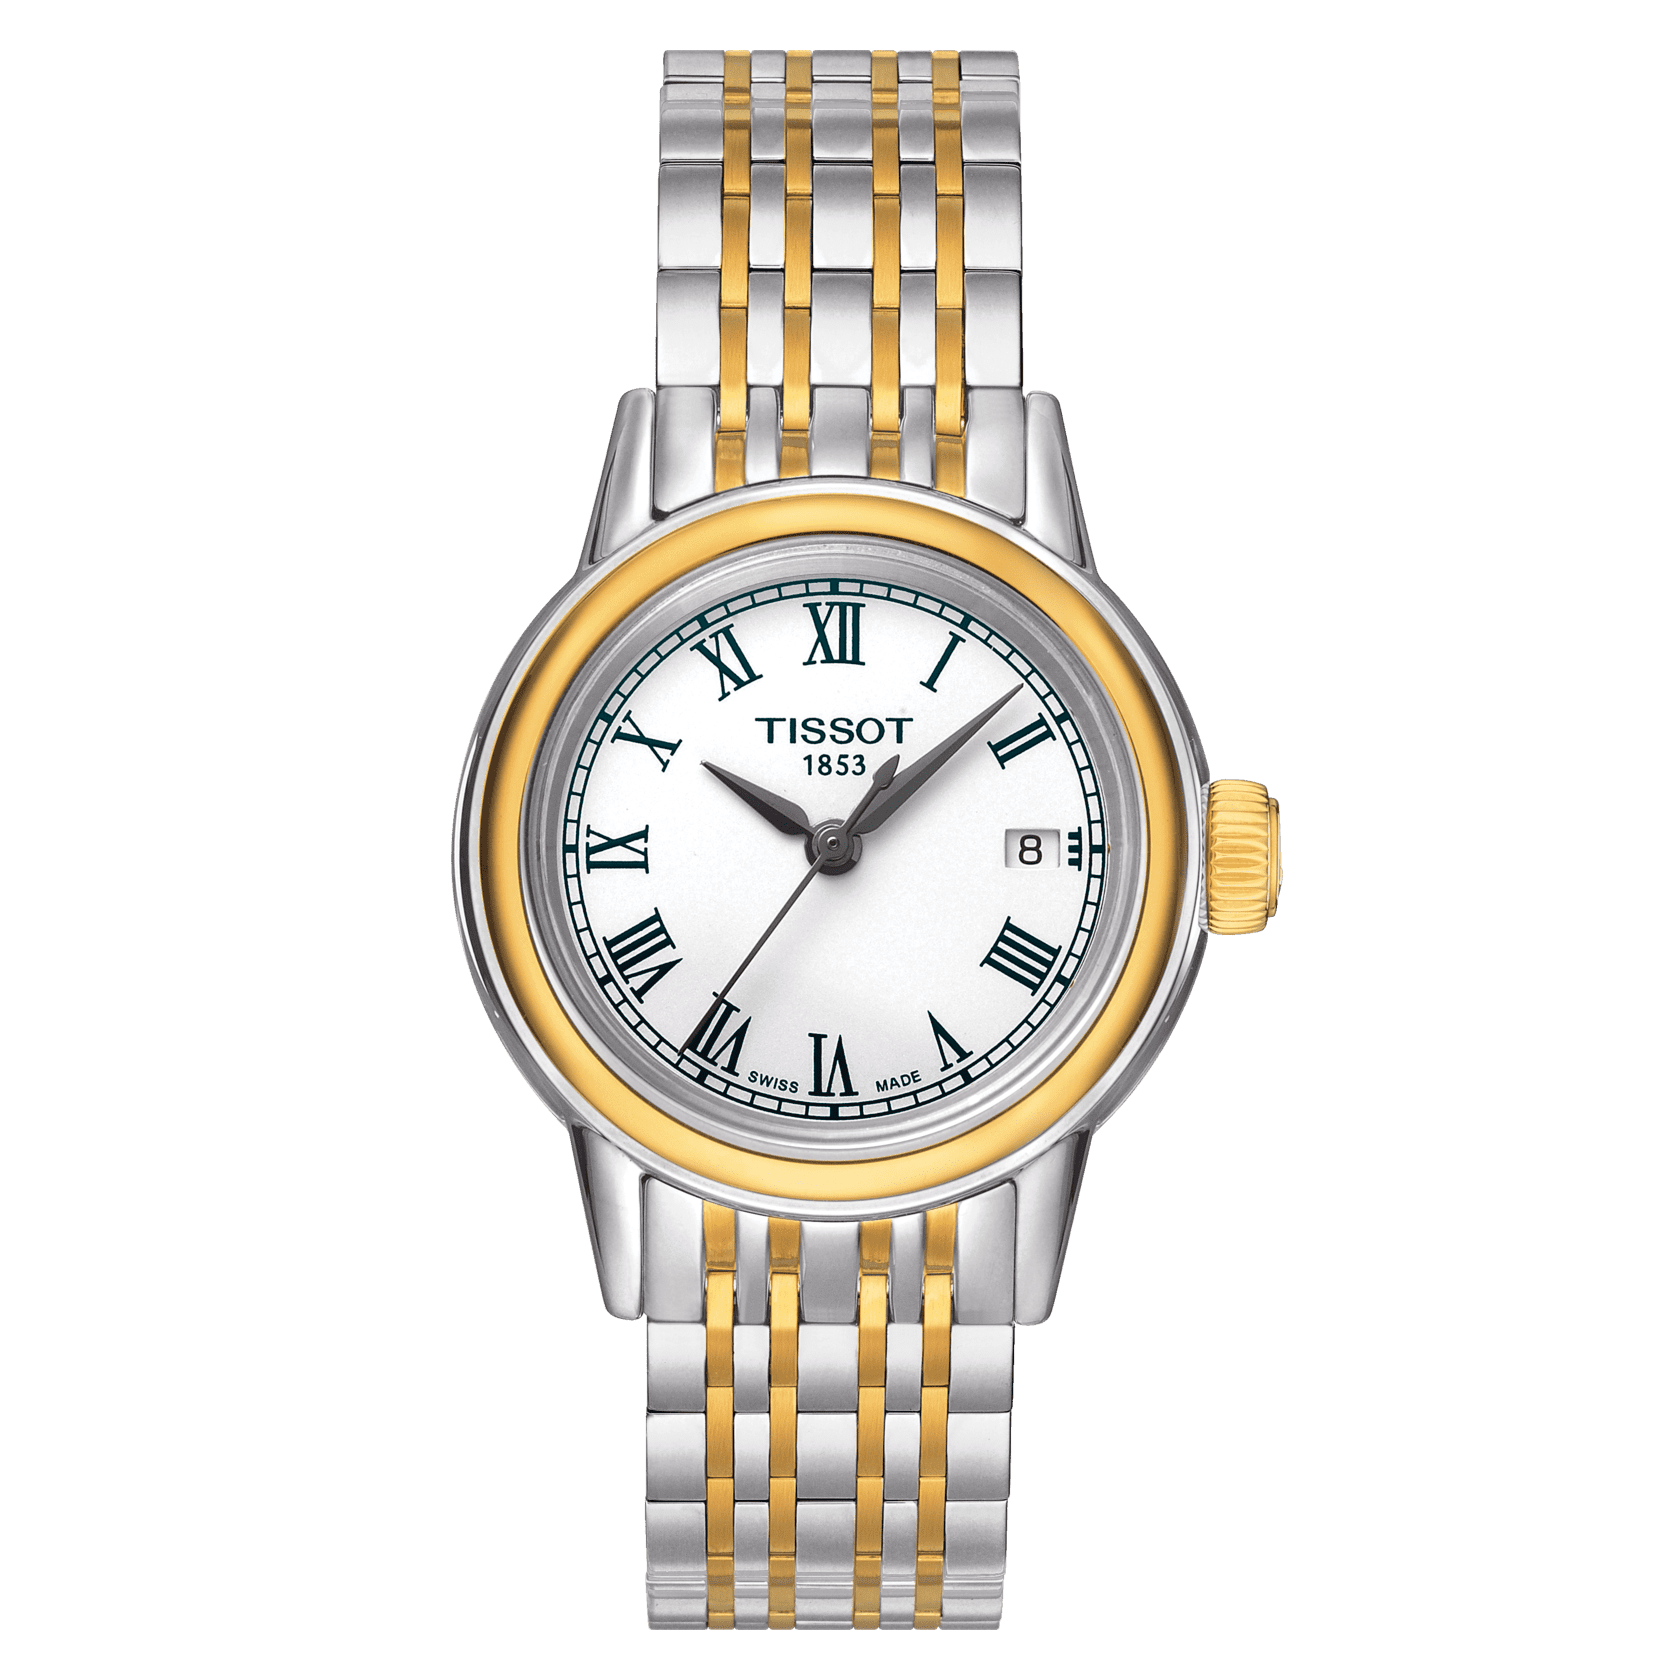 Japanese Top 10 Replica Watch Sites